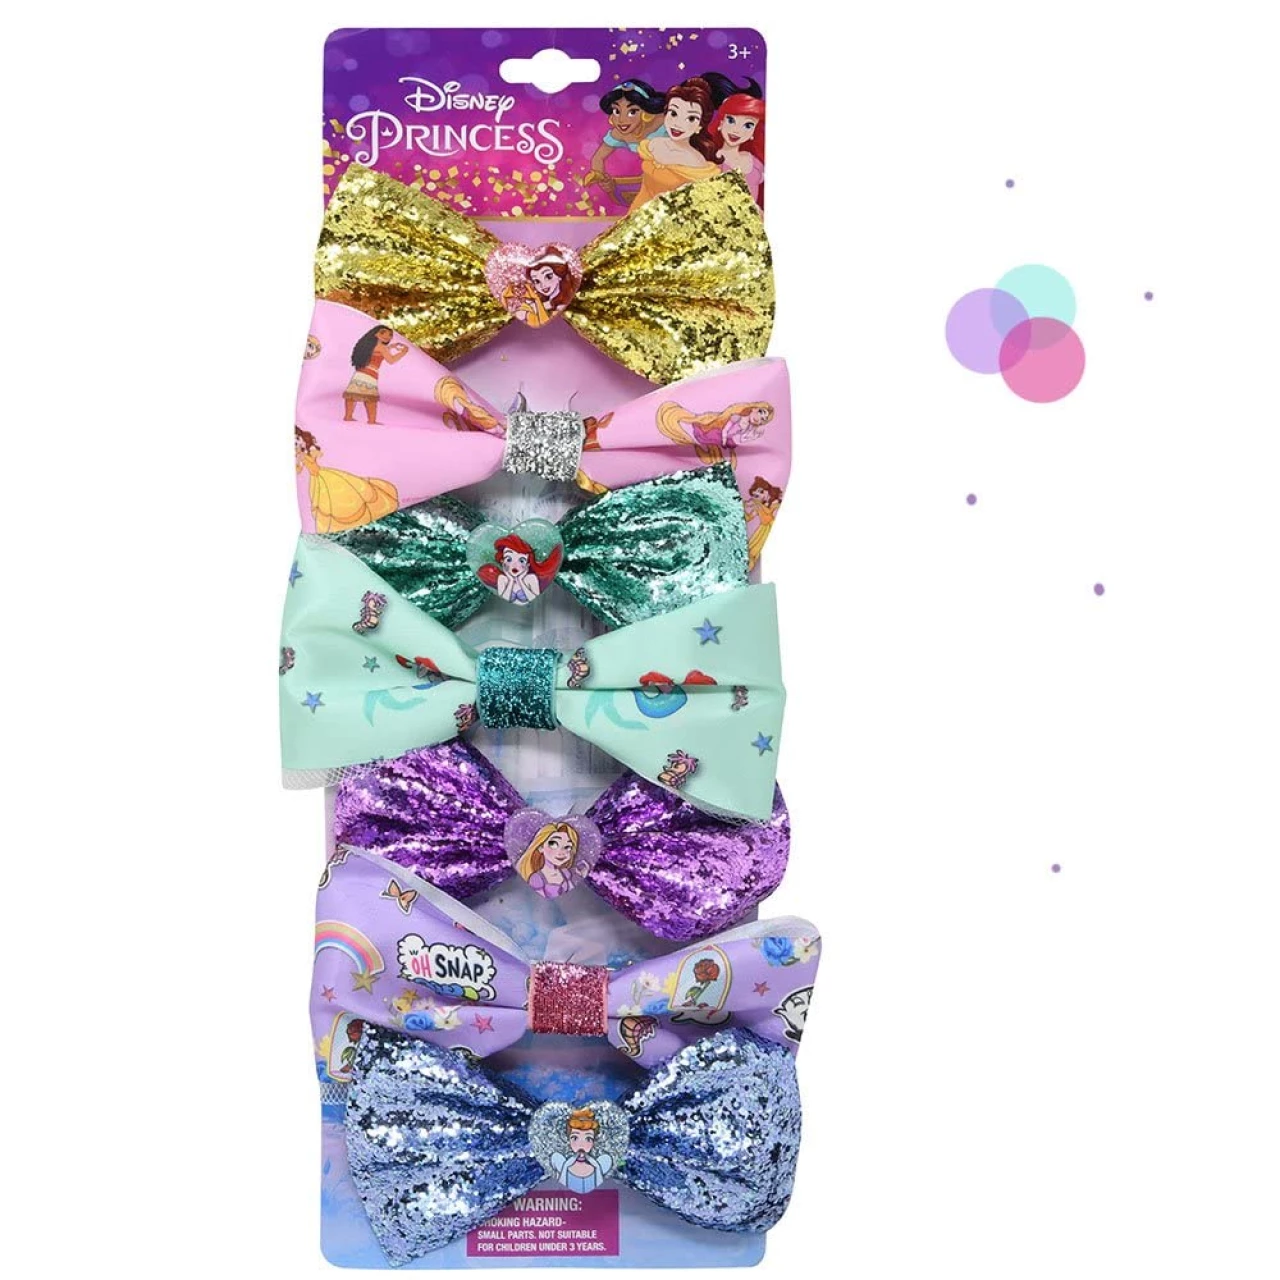 Disney Princesses Bow Set – Disney Princess Hair Bows Featuring Moana, Rapunzel, Belle, Cinderella with Sequins and Metal Clip – Sparkly Sequined Bow Clips for Girls Hair Accessories – 7 Piece